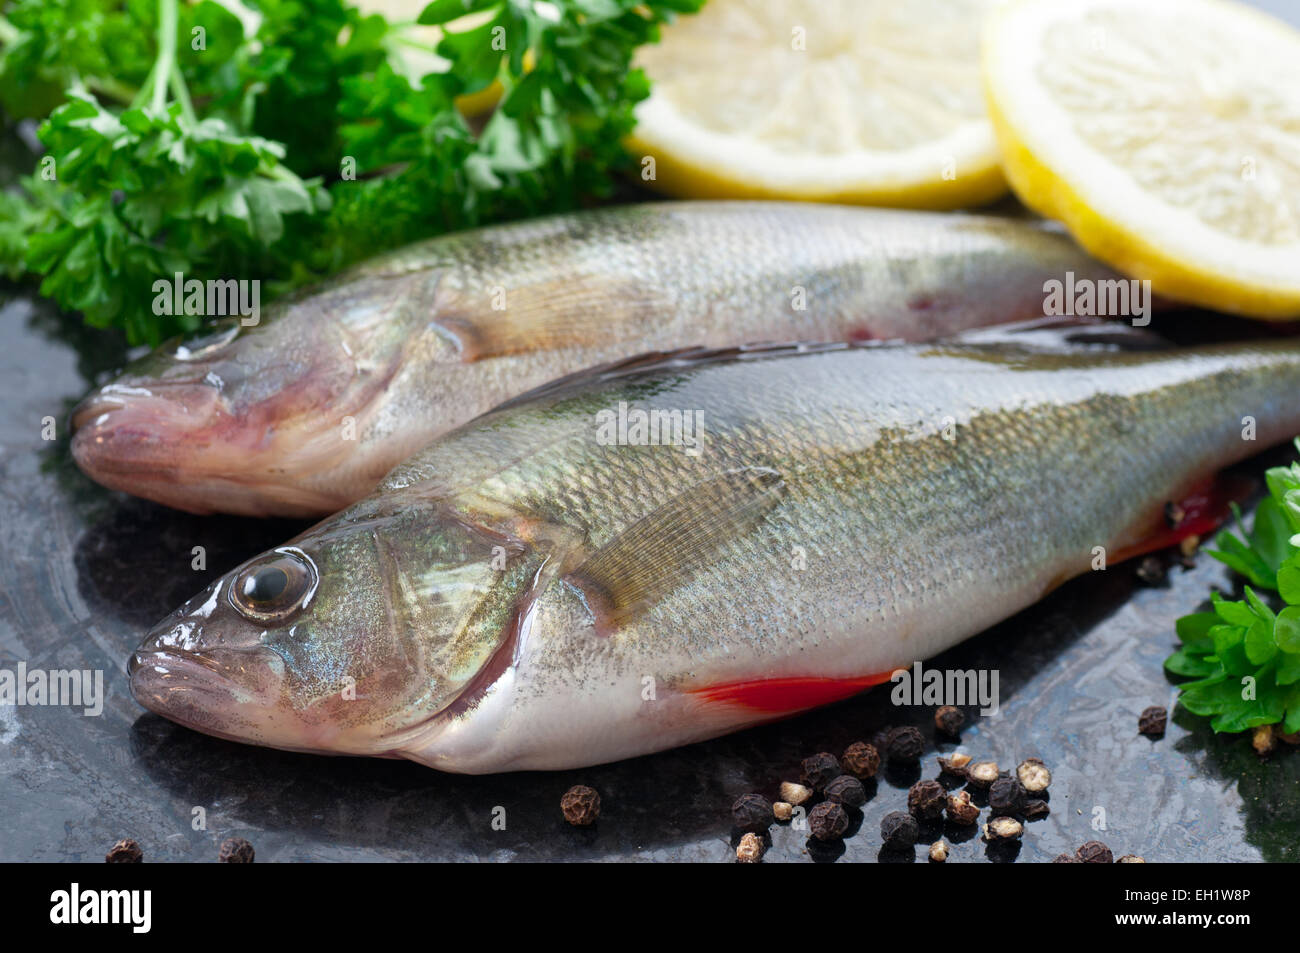 Freshly caught perch with spices and ingredients. Stock Photo